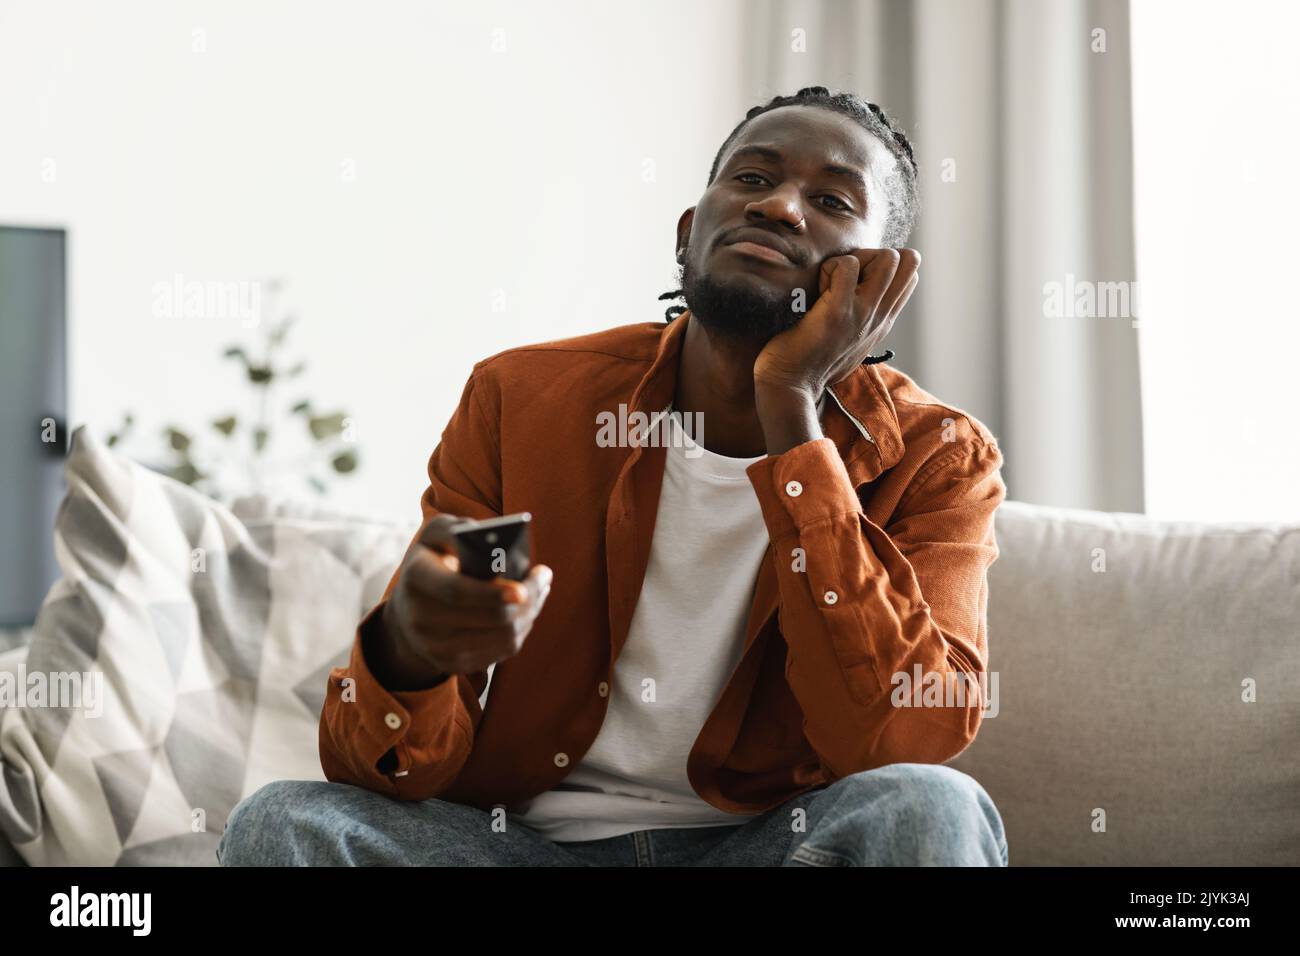 Boring television program. Bored black man watching TV and switching channels with remote control, sitting on couch Stock Photo